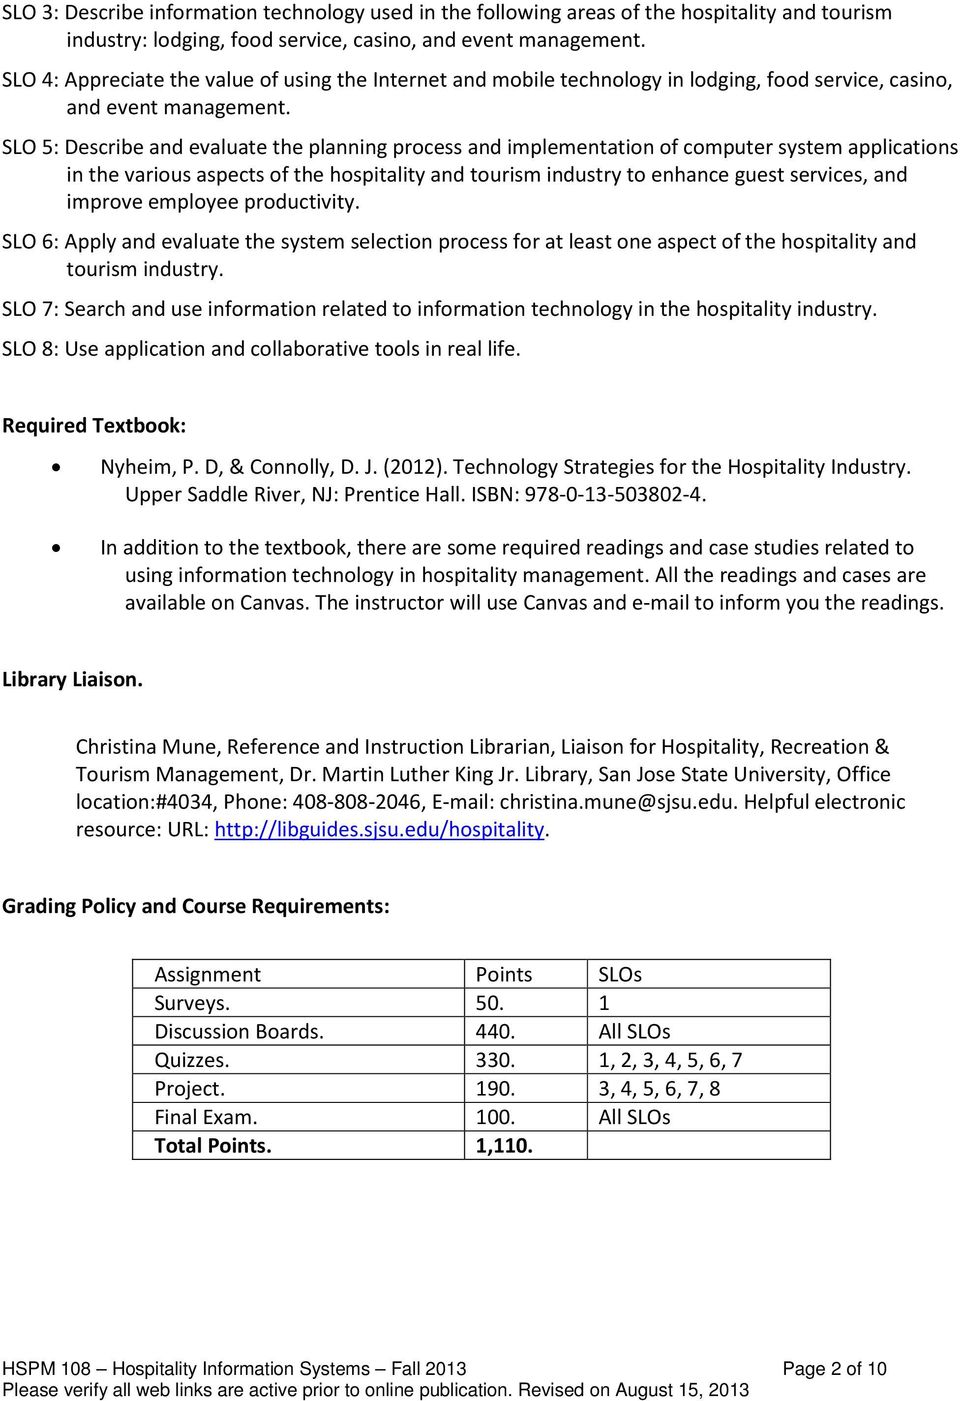 SLO 5: Describe and evaluate the planning process and implementation of computer system applications in the various aspects of the hospitality and tourism industry to enhance guest services, and